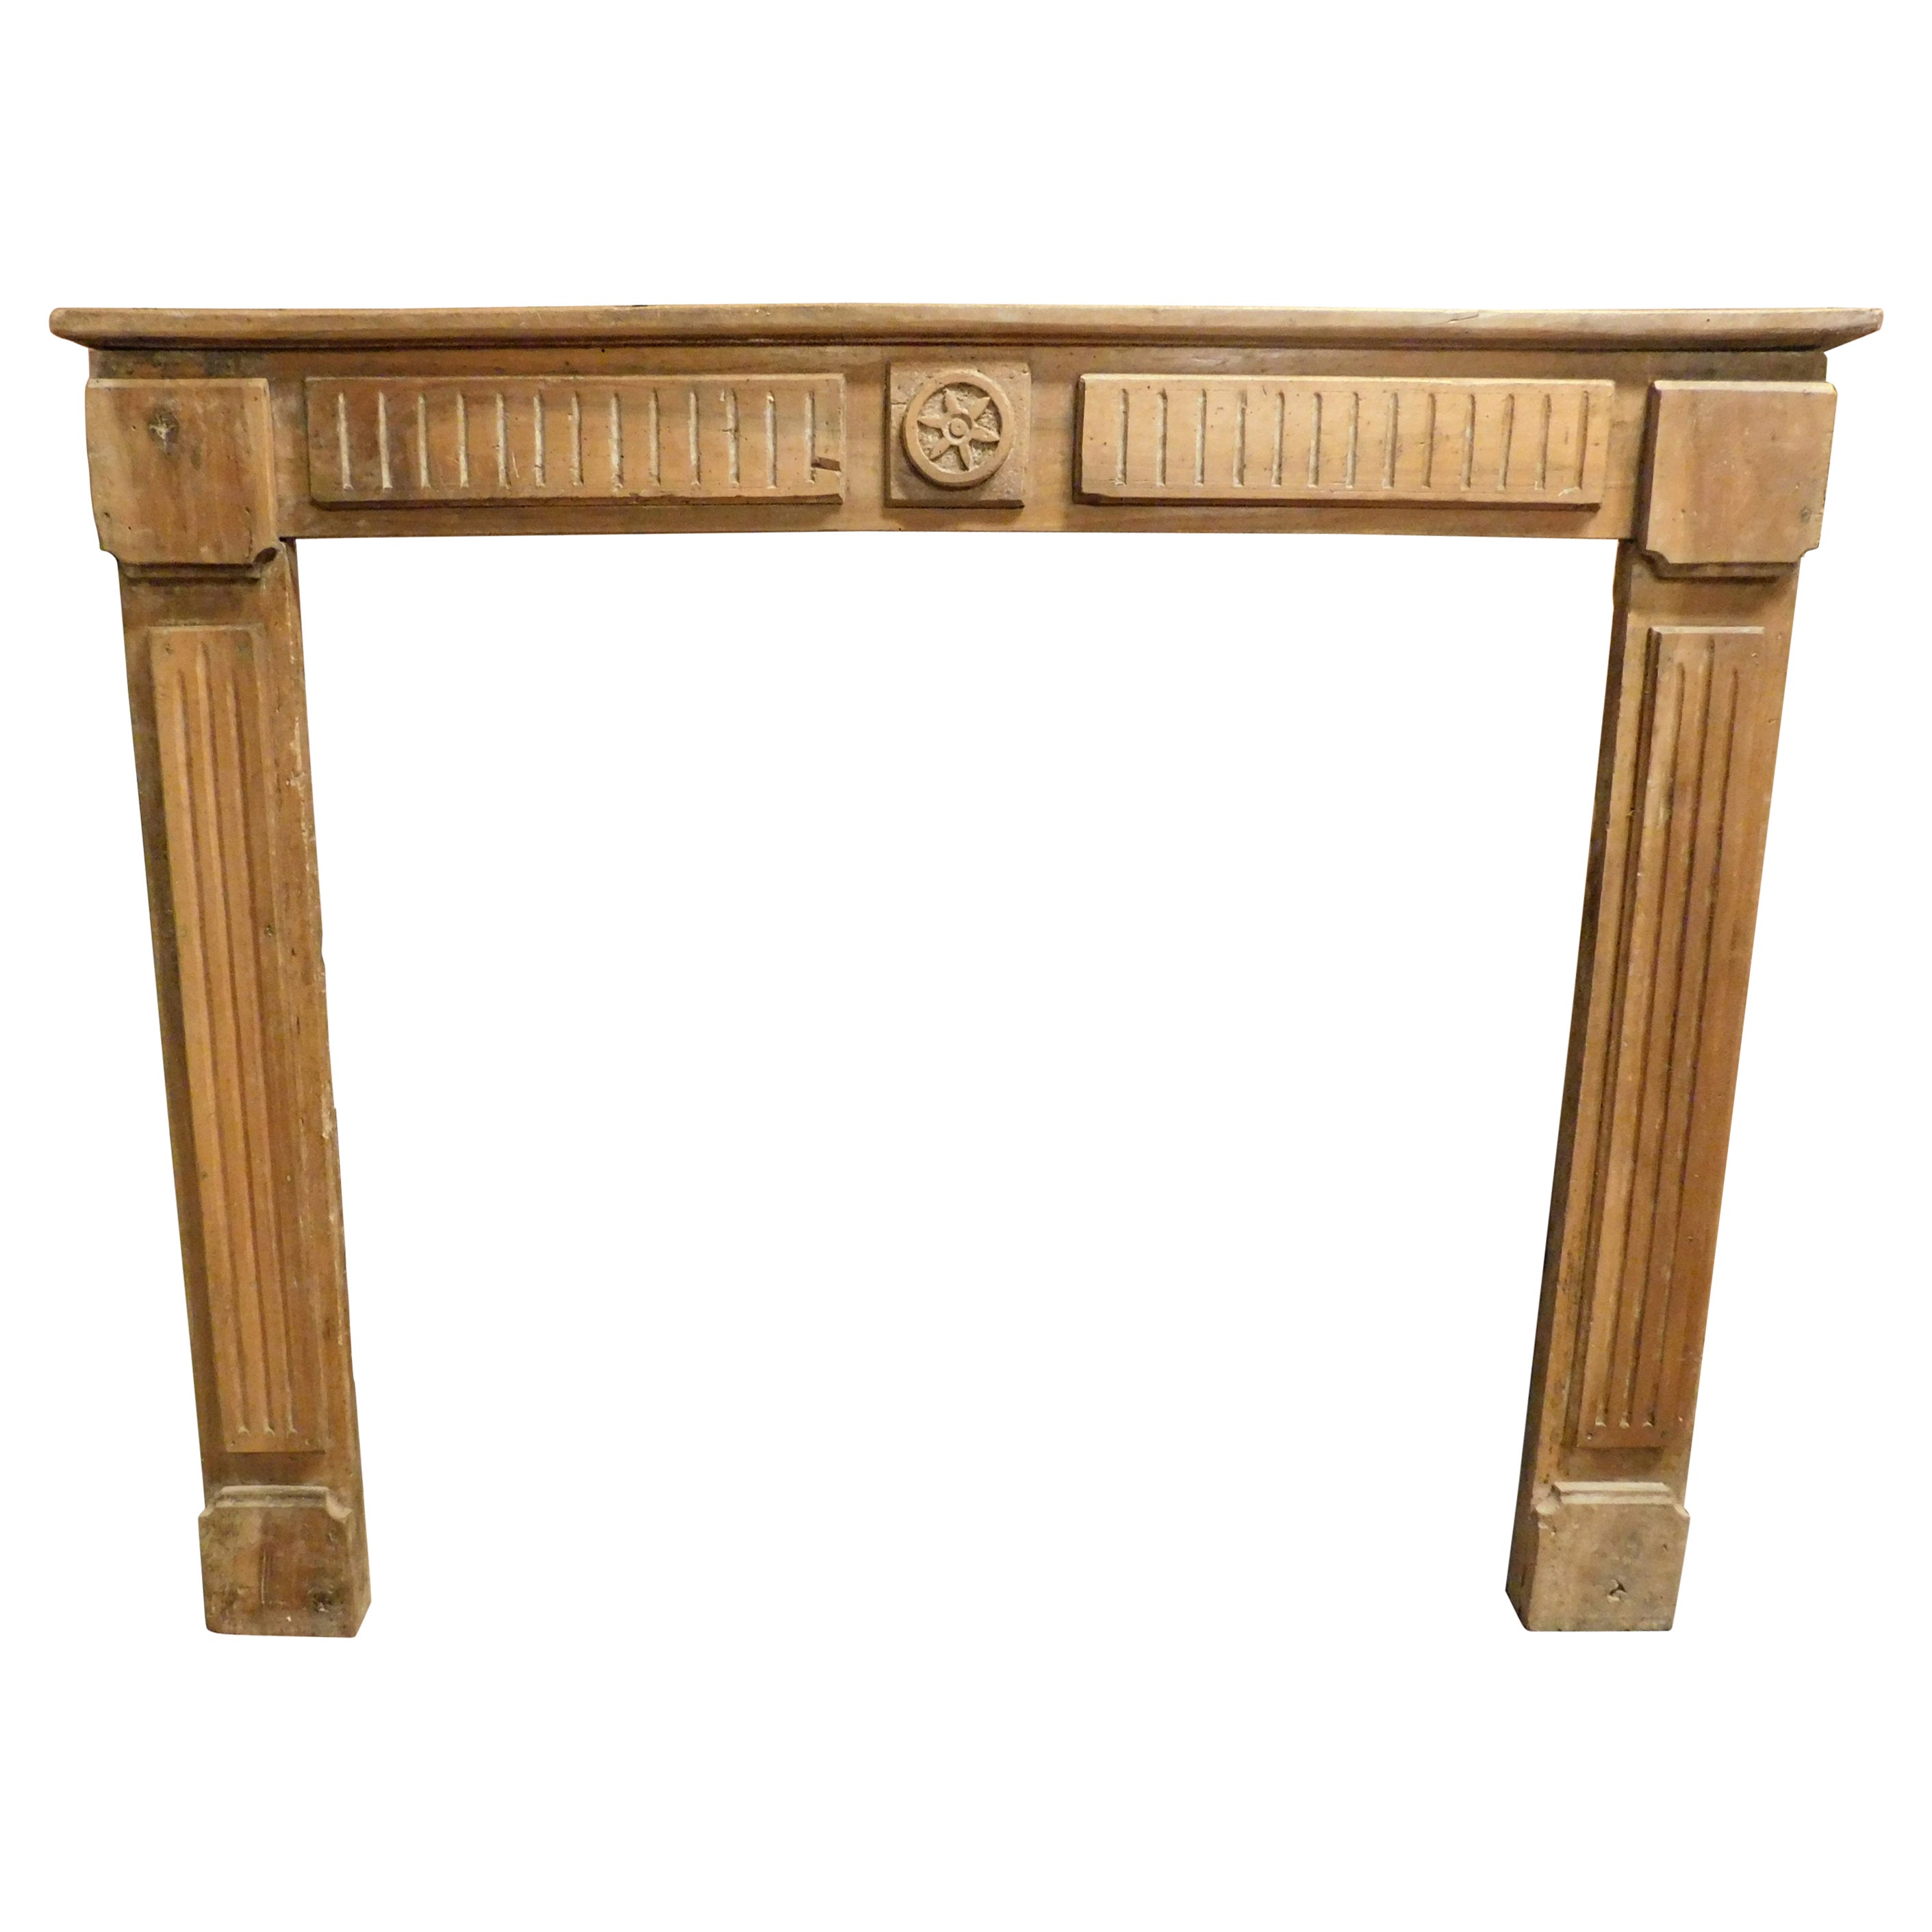 Antique Mantel Fireplace, Hand-Carved Walnut Wood, Luis xvi, '700 Italy